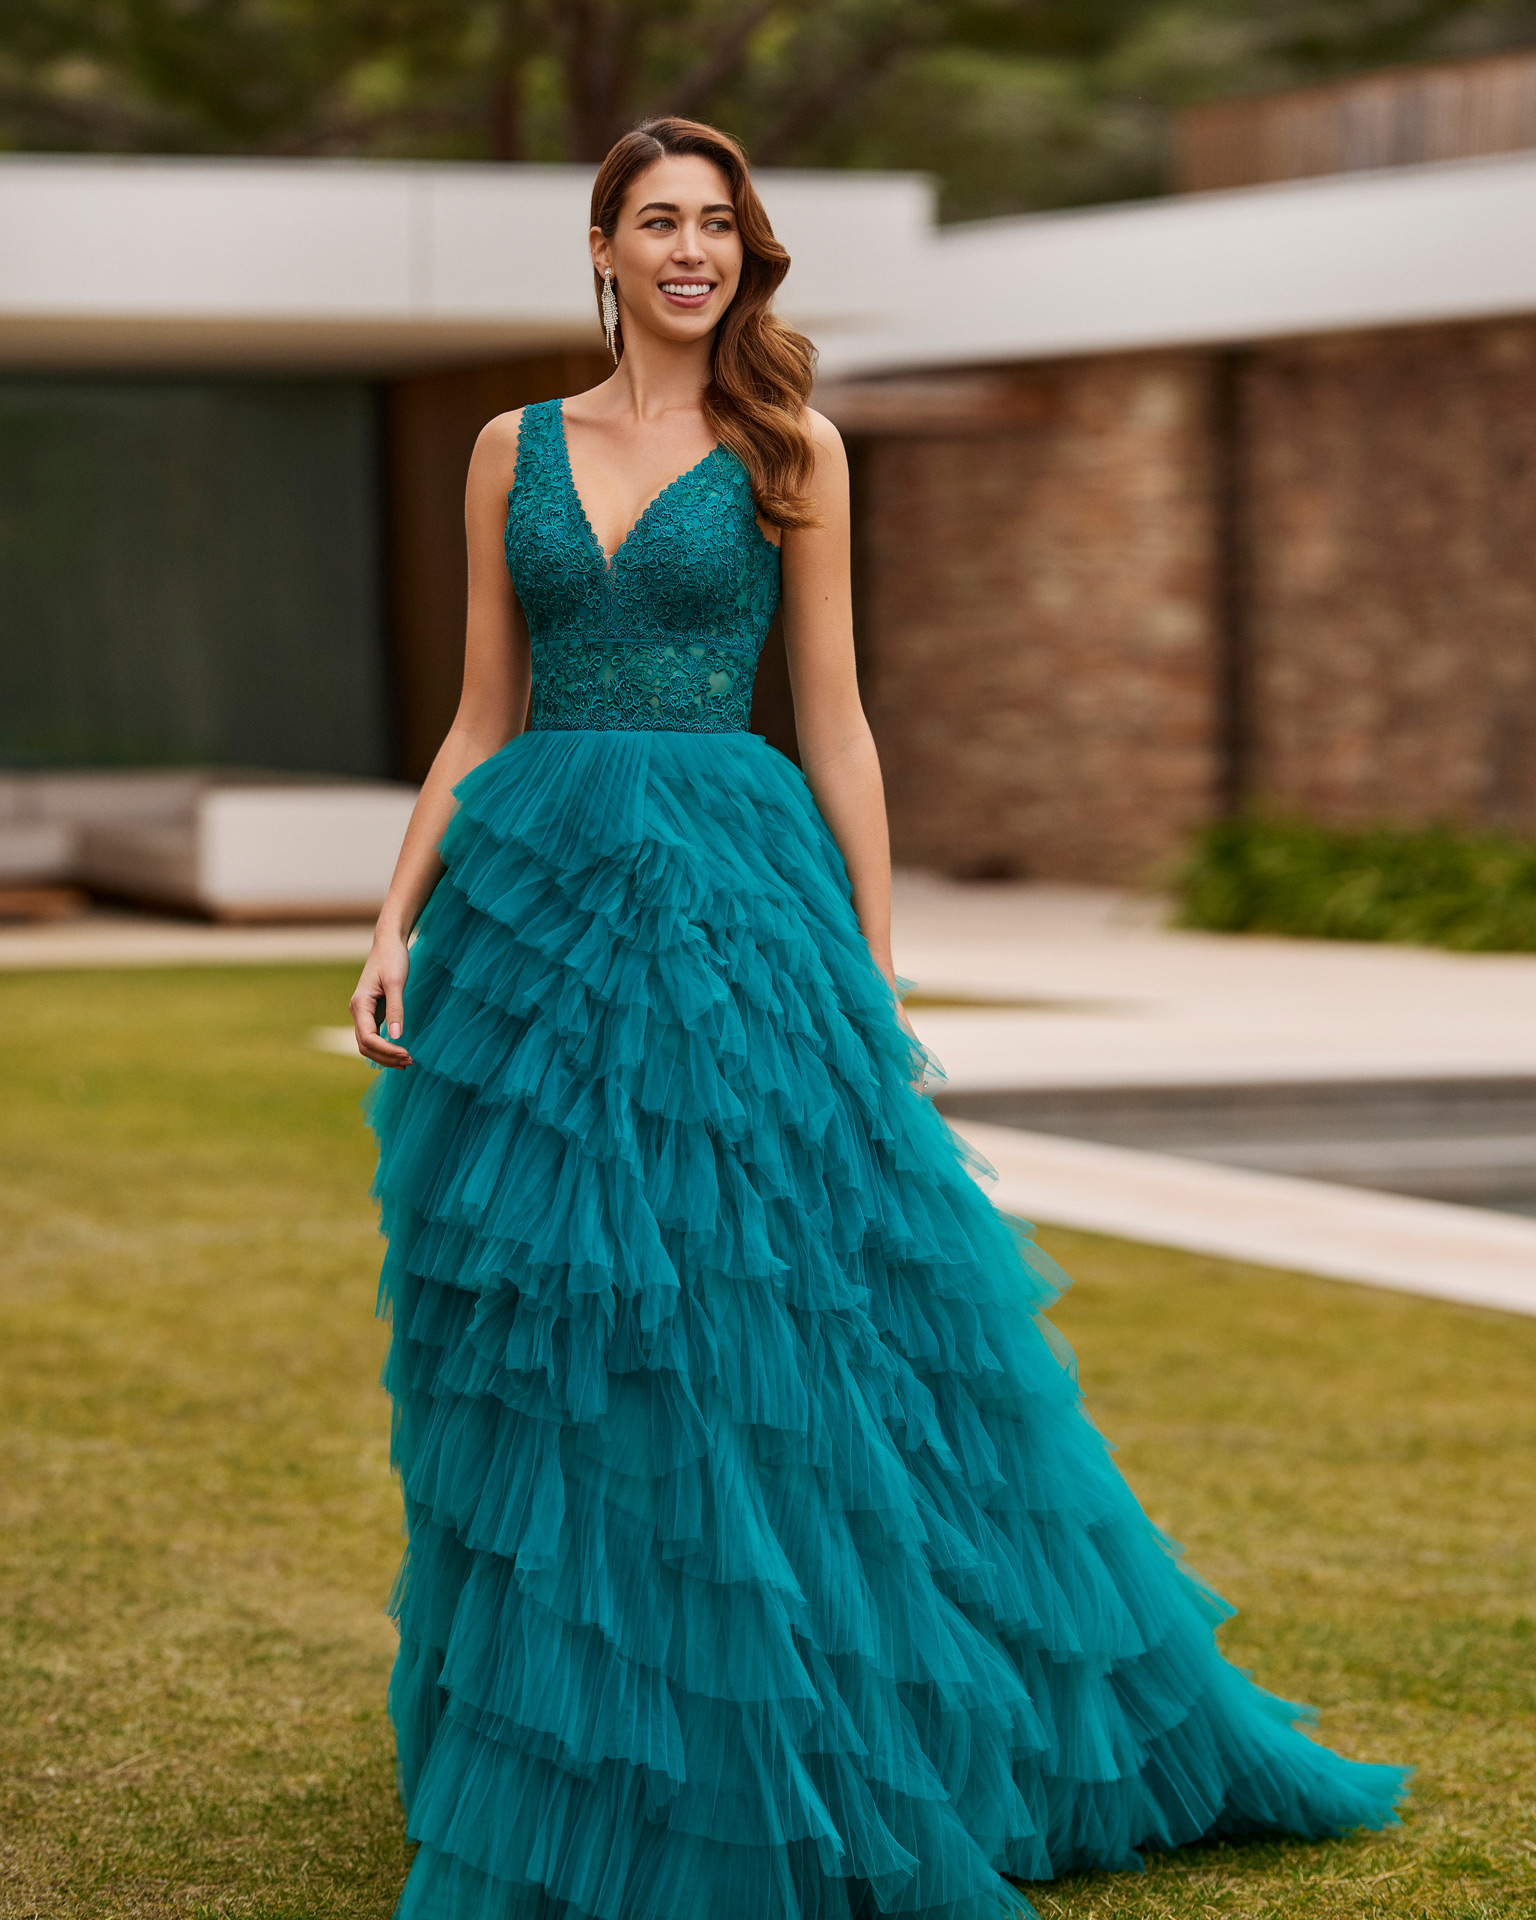 Princess style long evening dress. Crafted in tulle with lace details. With V-neckline and V-back. Marfil Barcelona design for parties and events. MARFIL_BARCELONA.